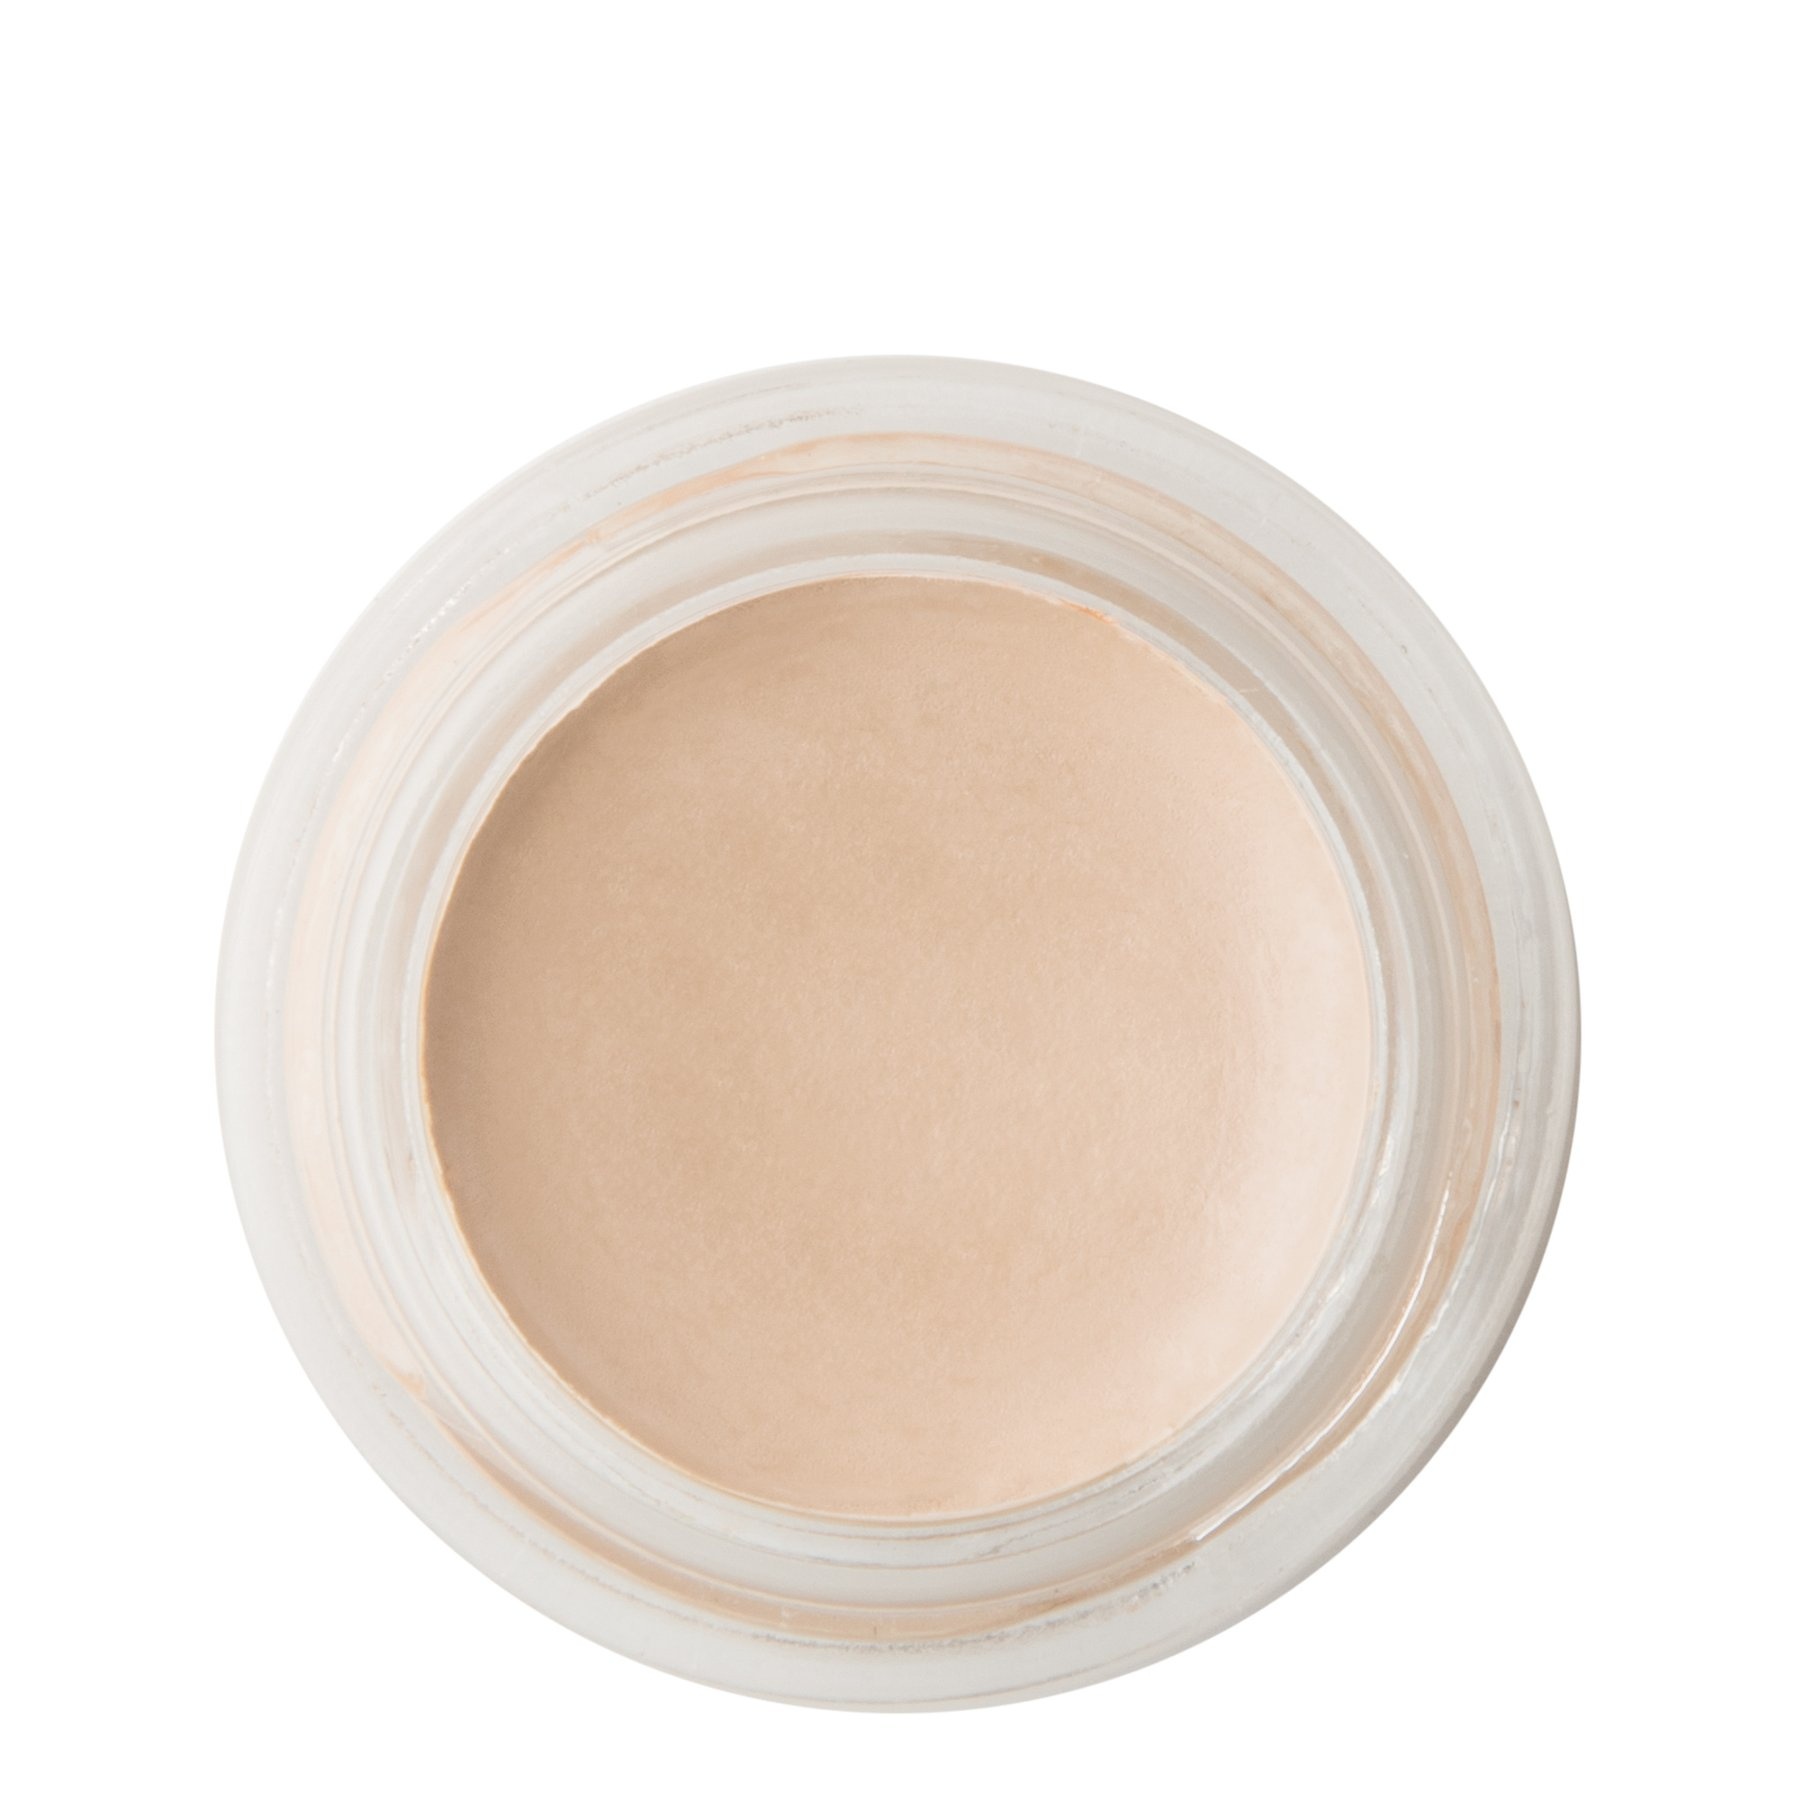 Juice Beauty Phyto-Pigments Perfecting Concealer - 05 Buff